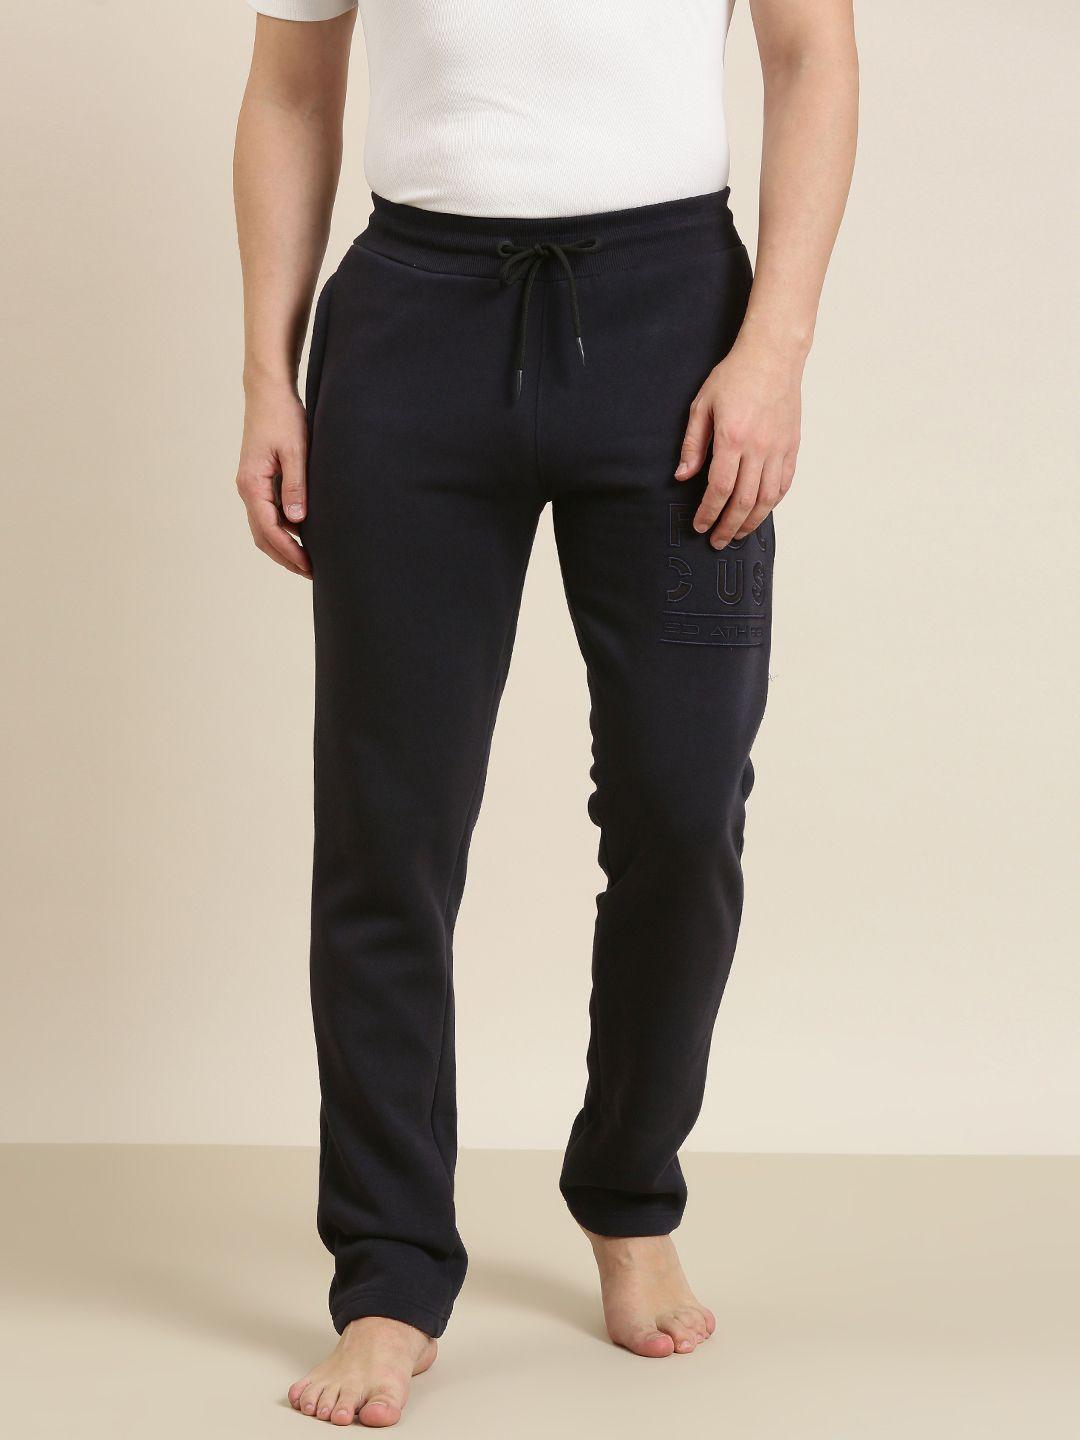 sweet dreams men solid straight lounge pants with contrast side panels